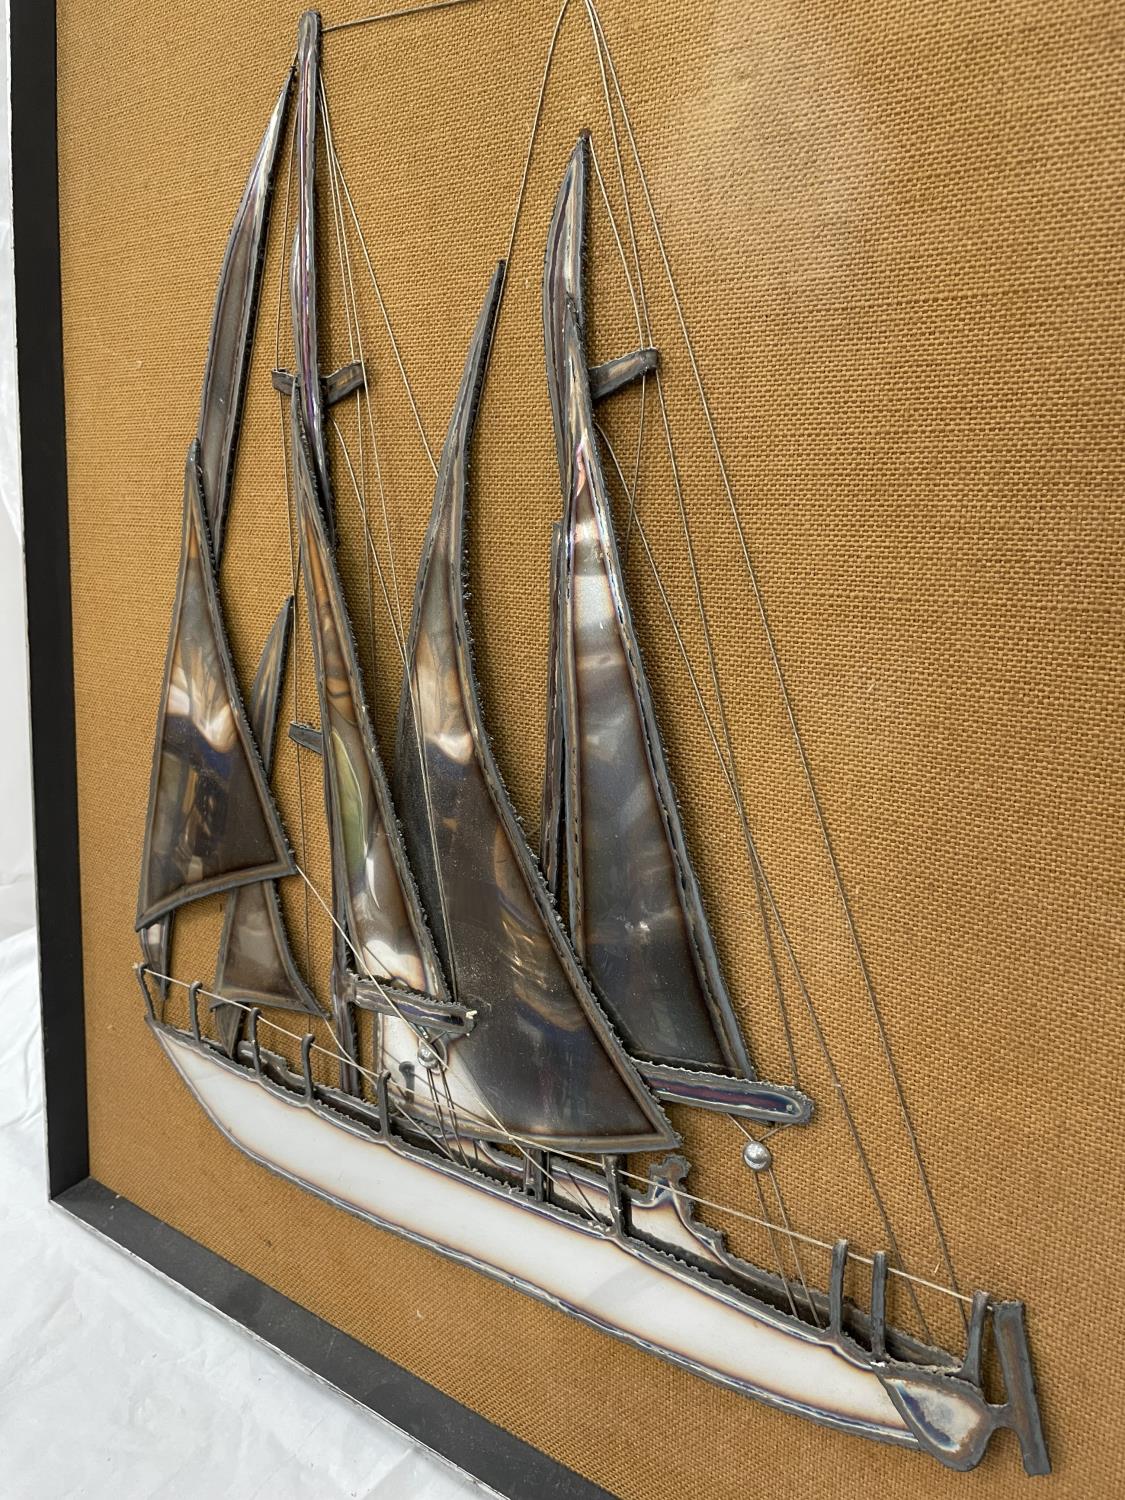 A LARGE METAL ART COLLAGE OF A SAILING BOAT 80CM X 70CM - Image 4 of 4